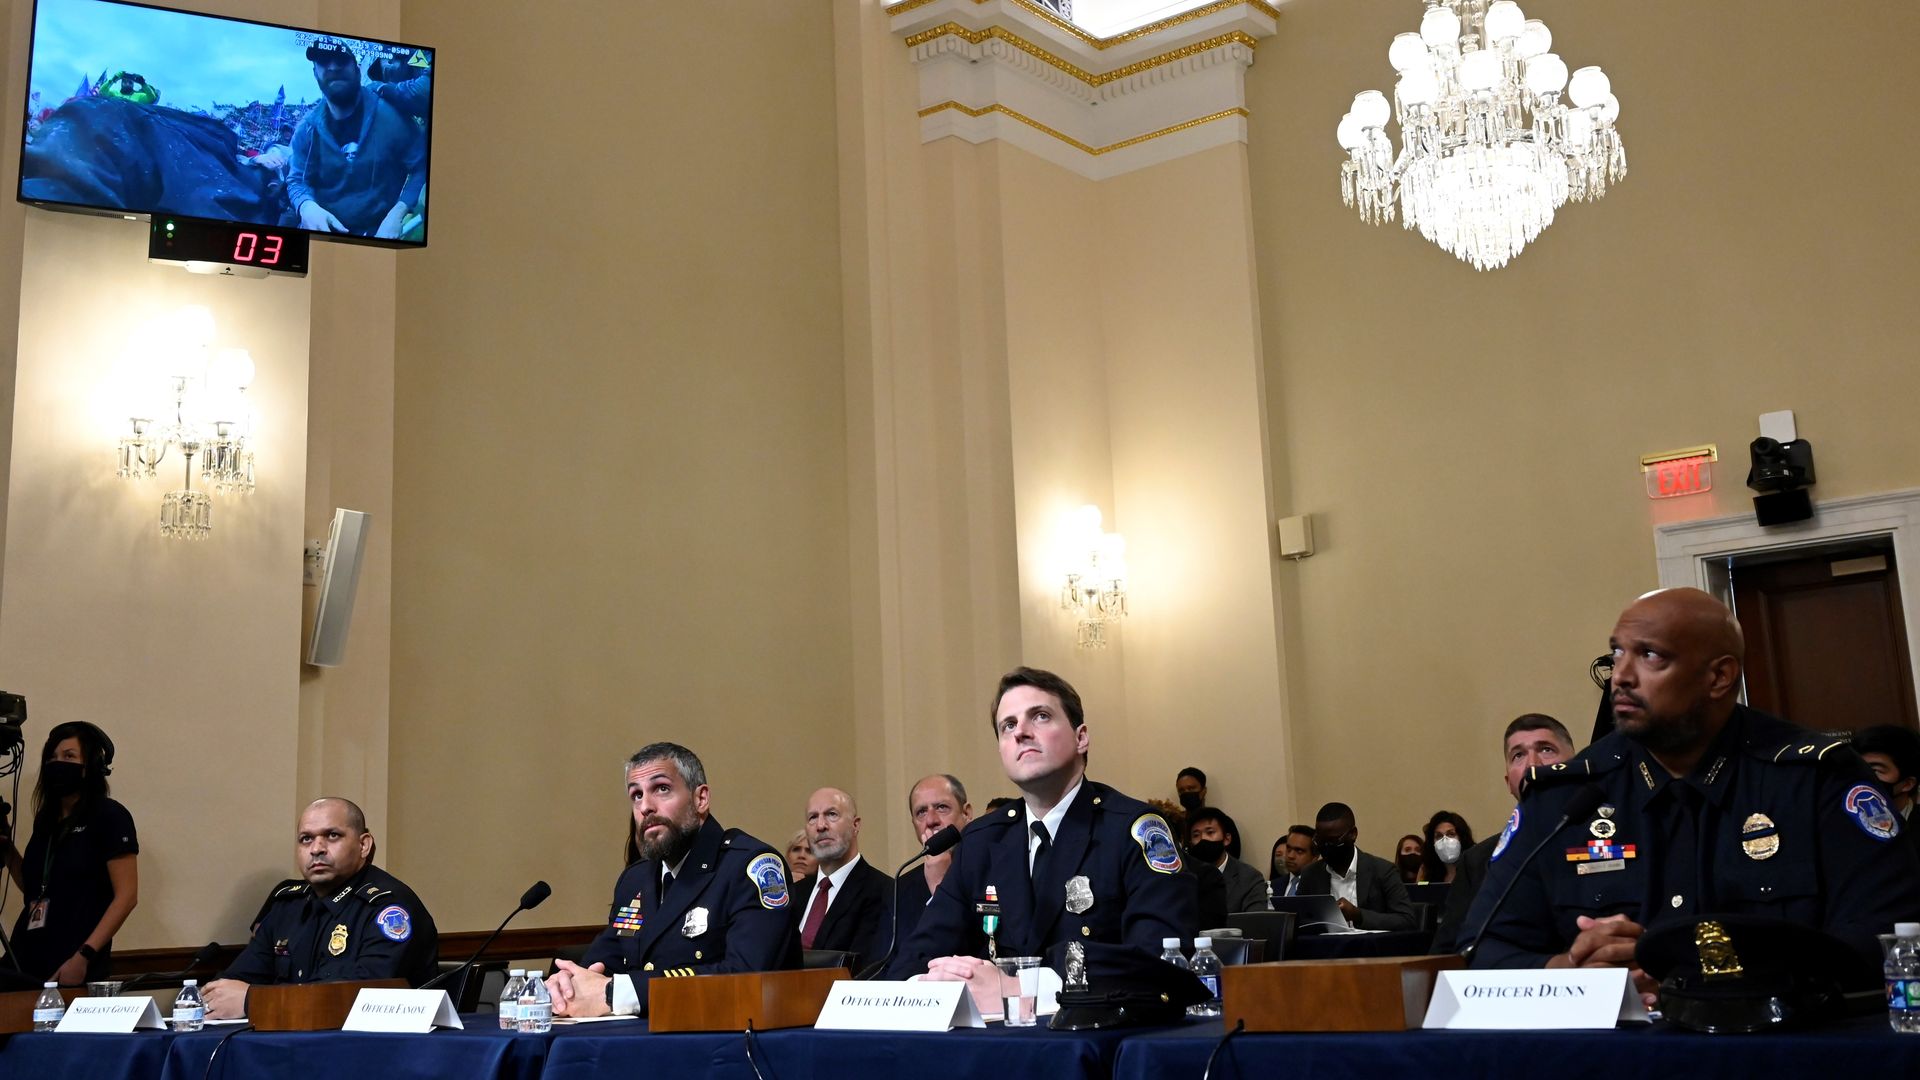 Capitol police officers testify about their experiences during the Jan. 6 riot.